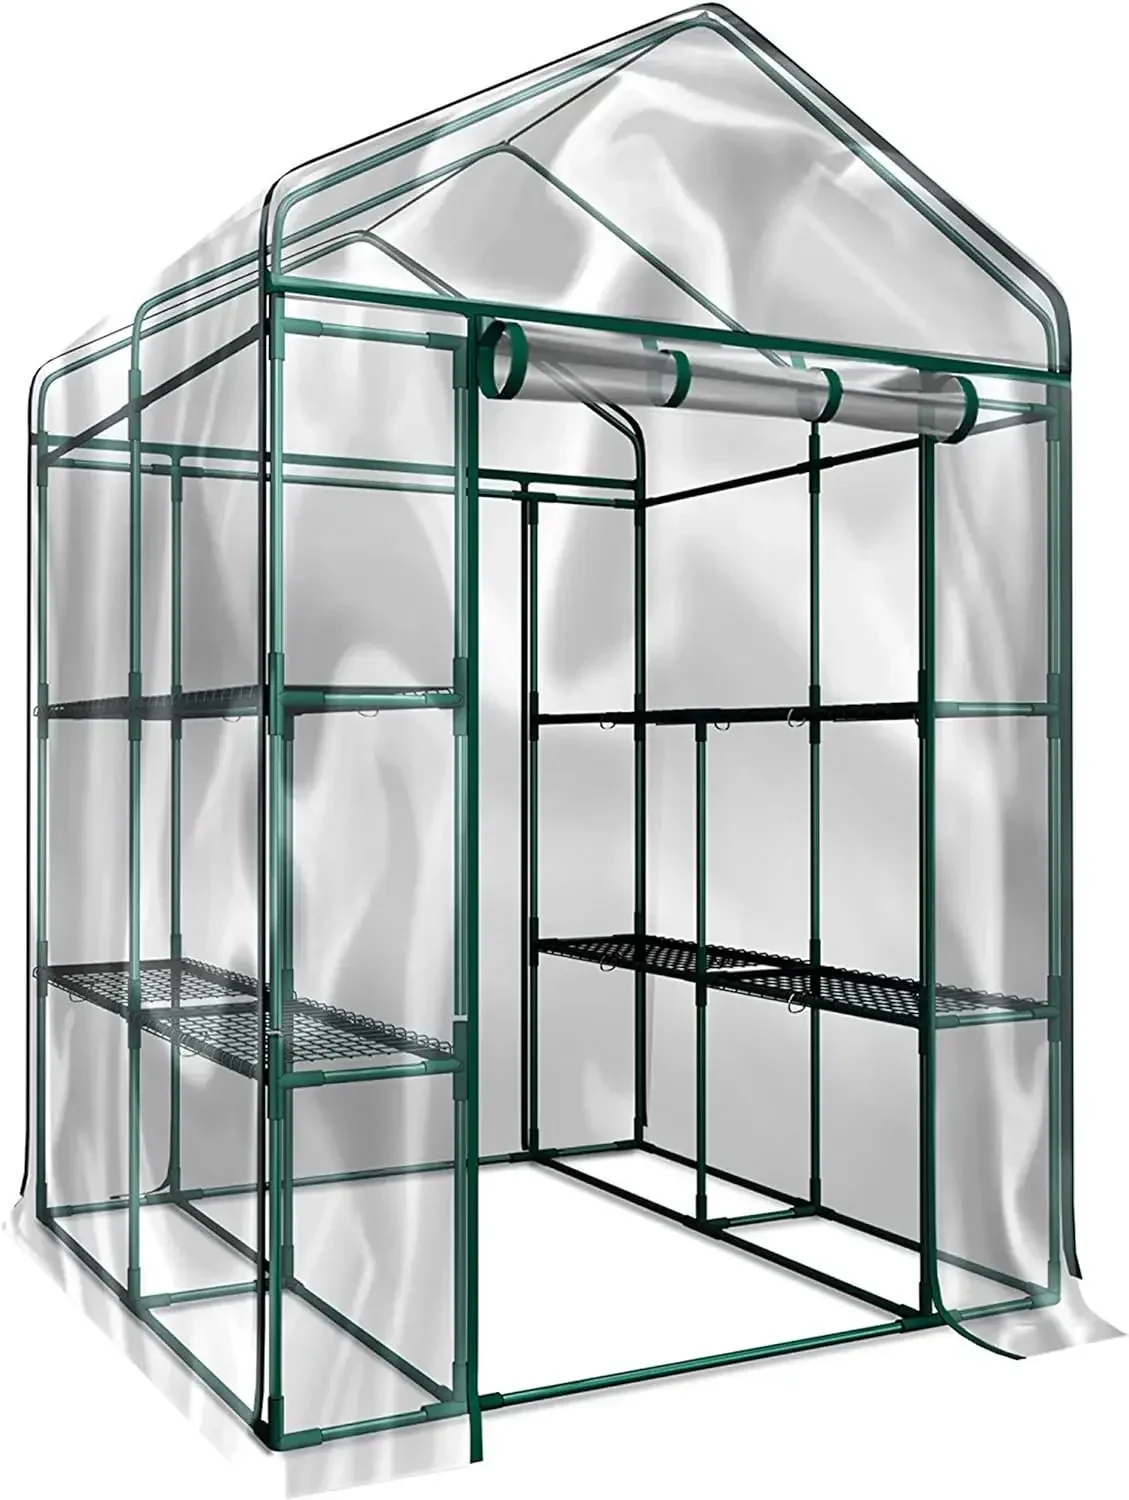 

Greenhouse - greenhouse with frame with 8 Sturdy Shelves and PVC Cover for Indoor or Outdoor Use - 56 x 56 x 76-Inch